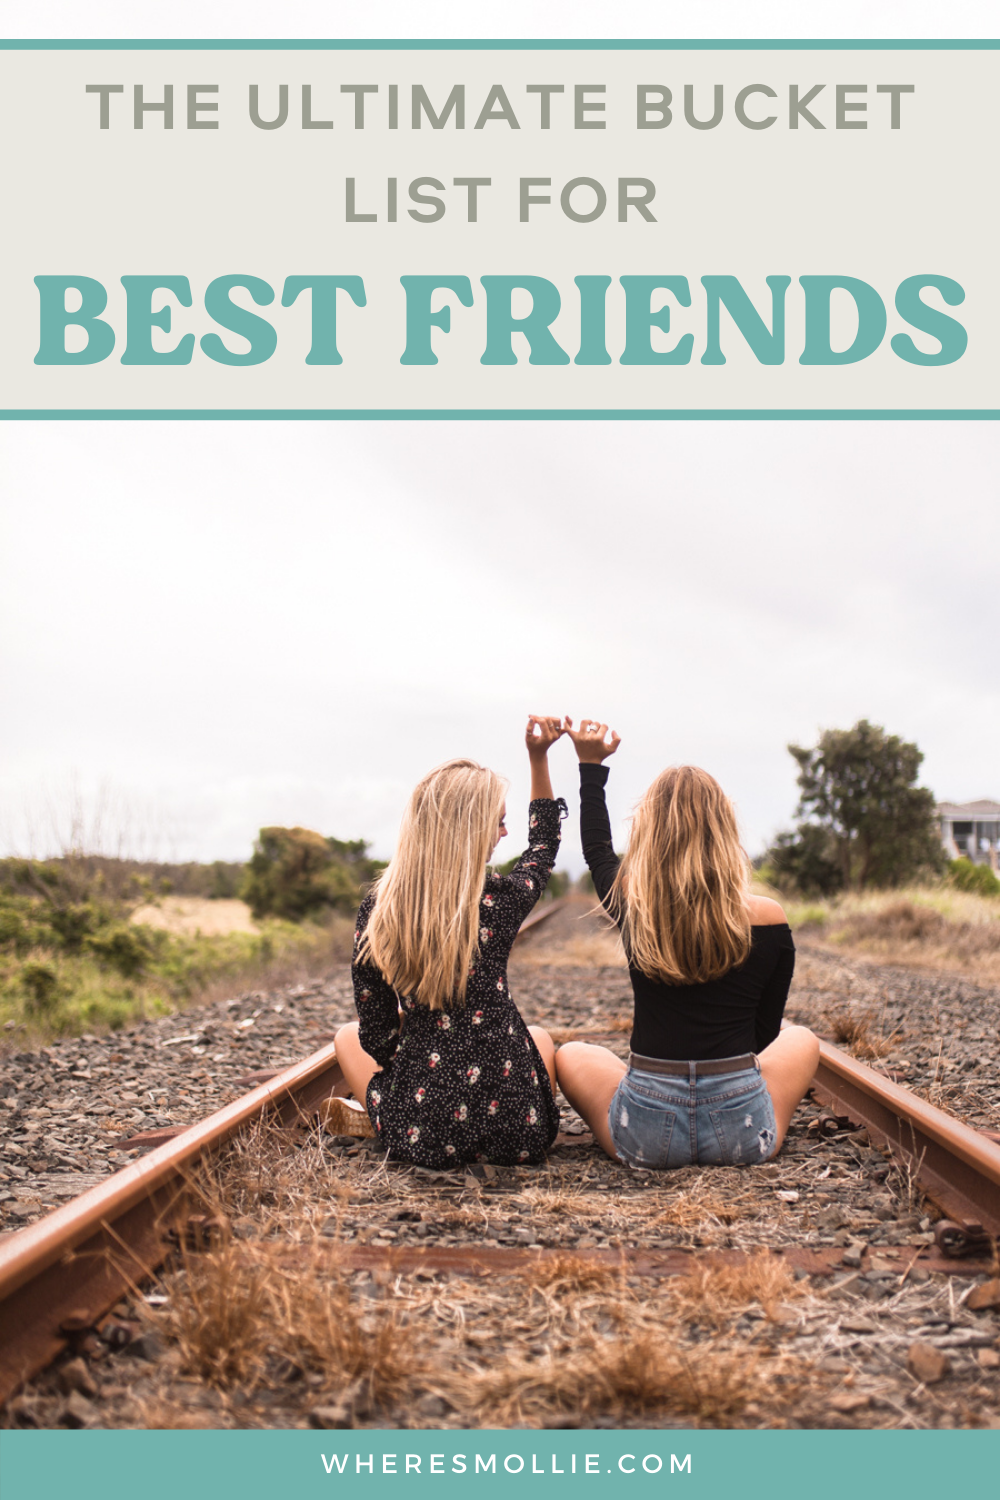 35 bucket list adventures to go on with your best friend